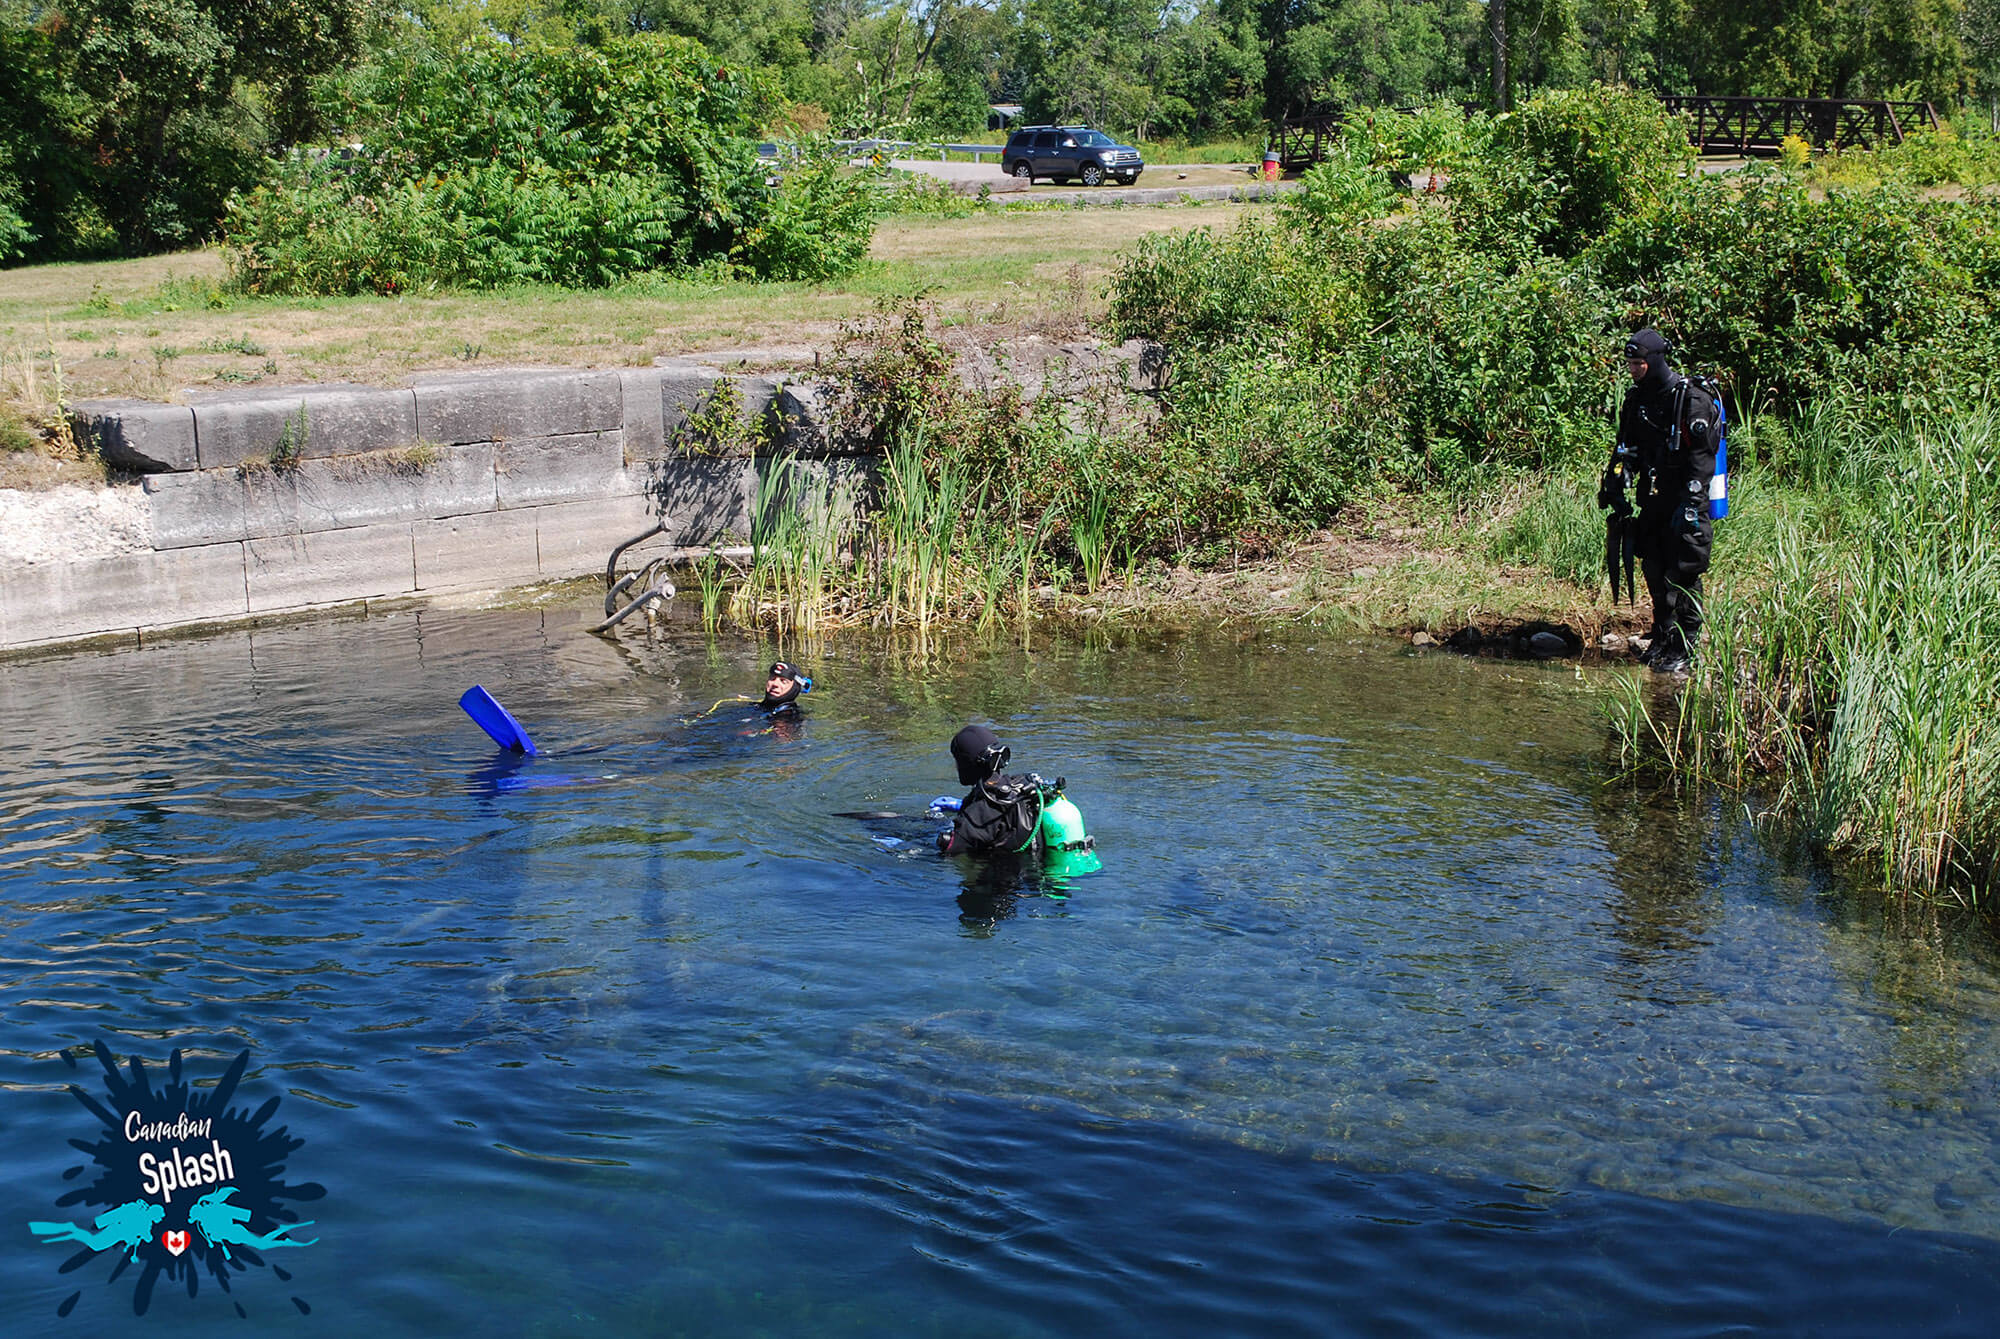 Three Scuba Divers At The Entry Point To The Gallo Canal WeeHawk Wreck In Southern Ontario, Canada Scuba Diving